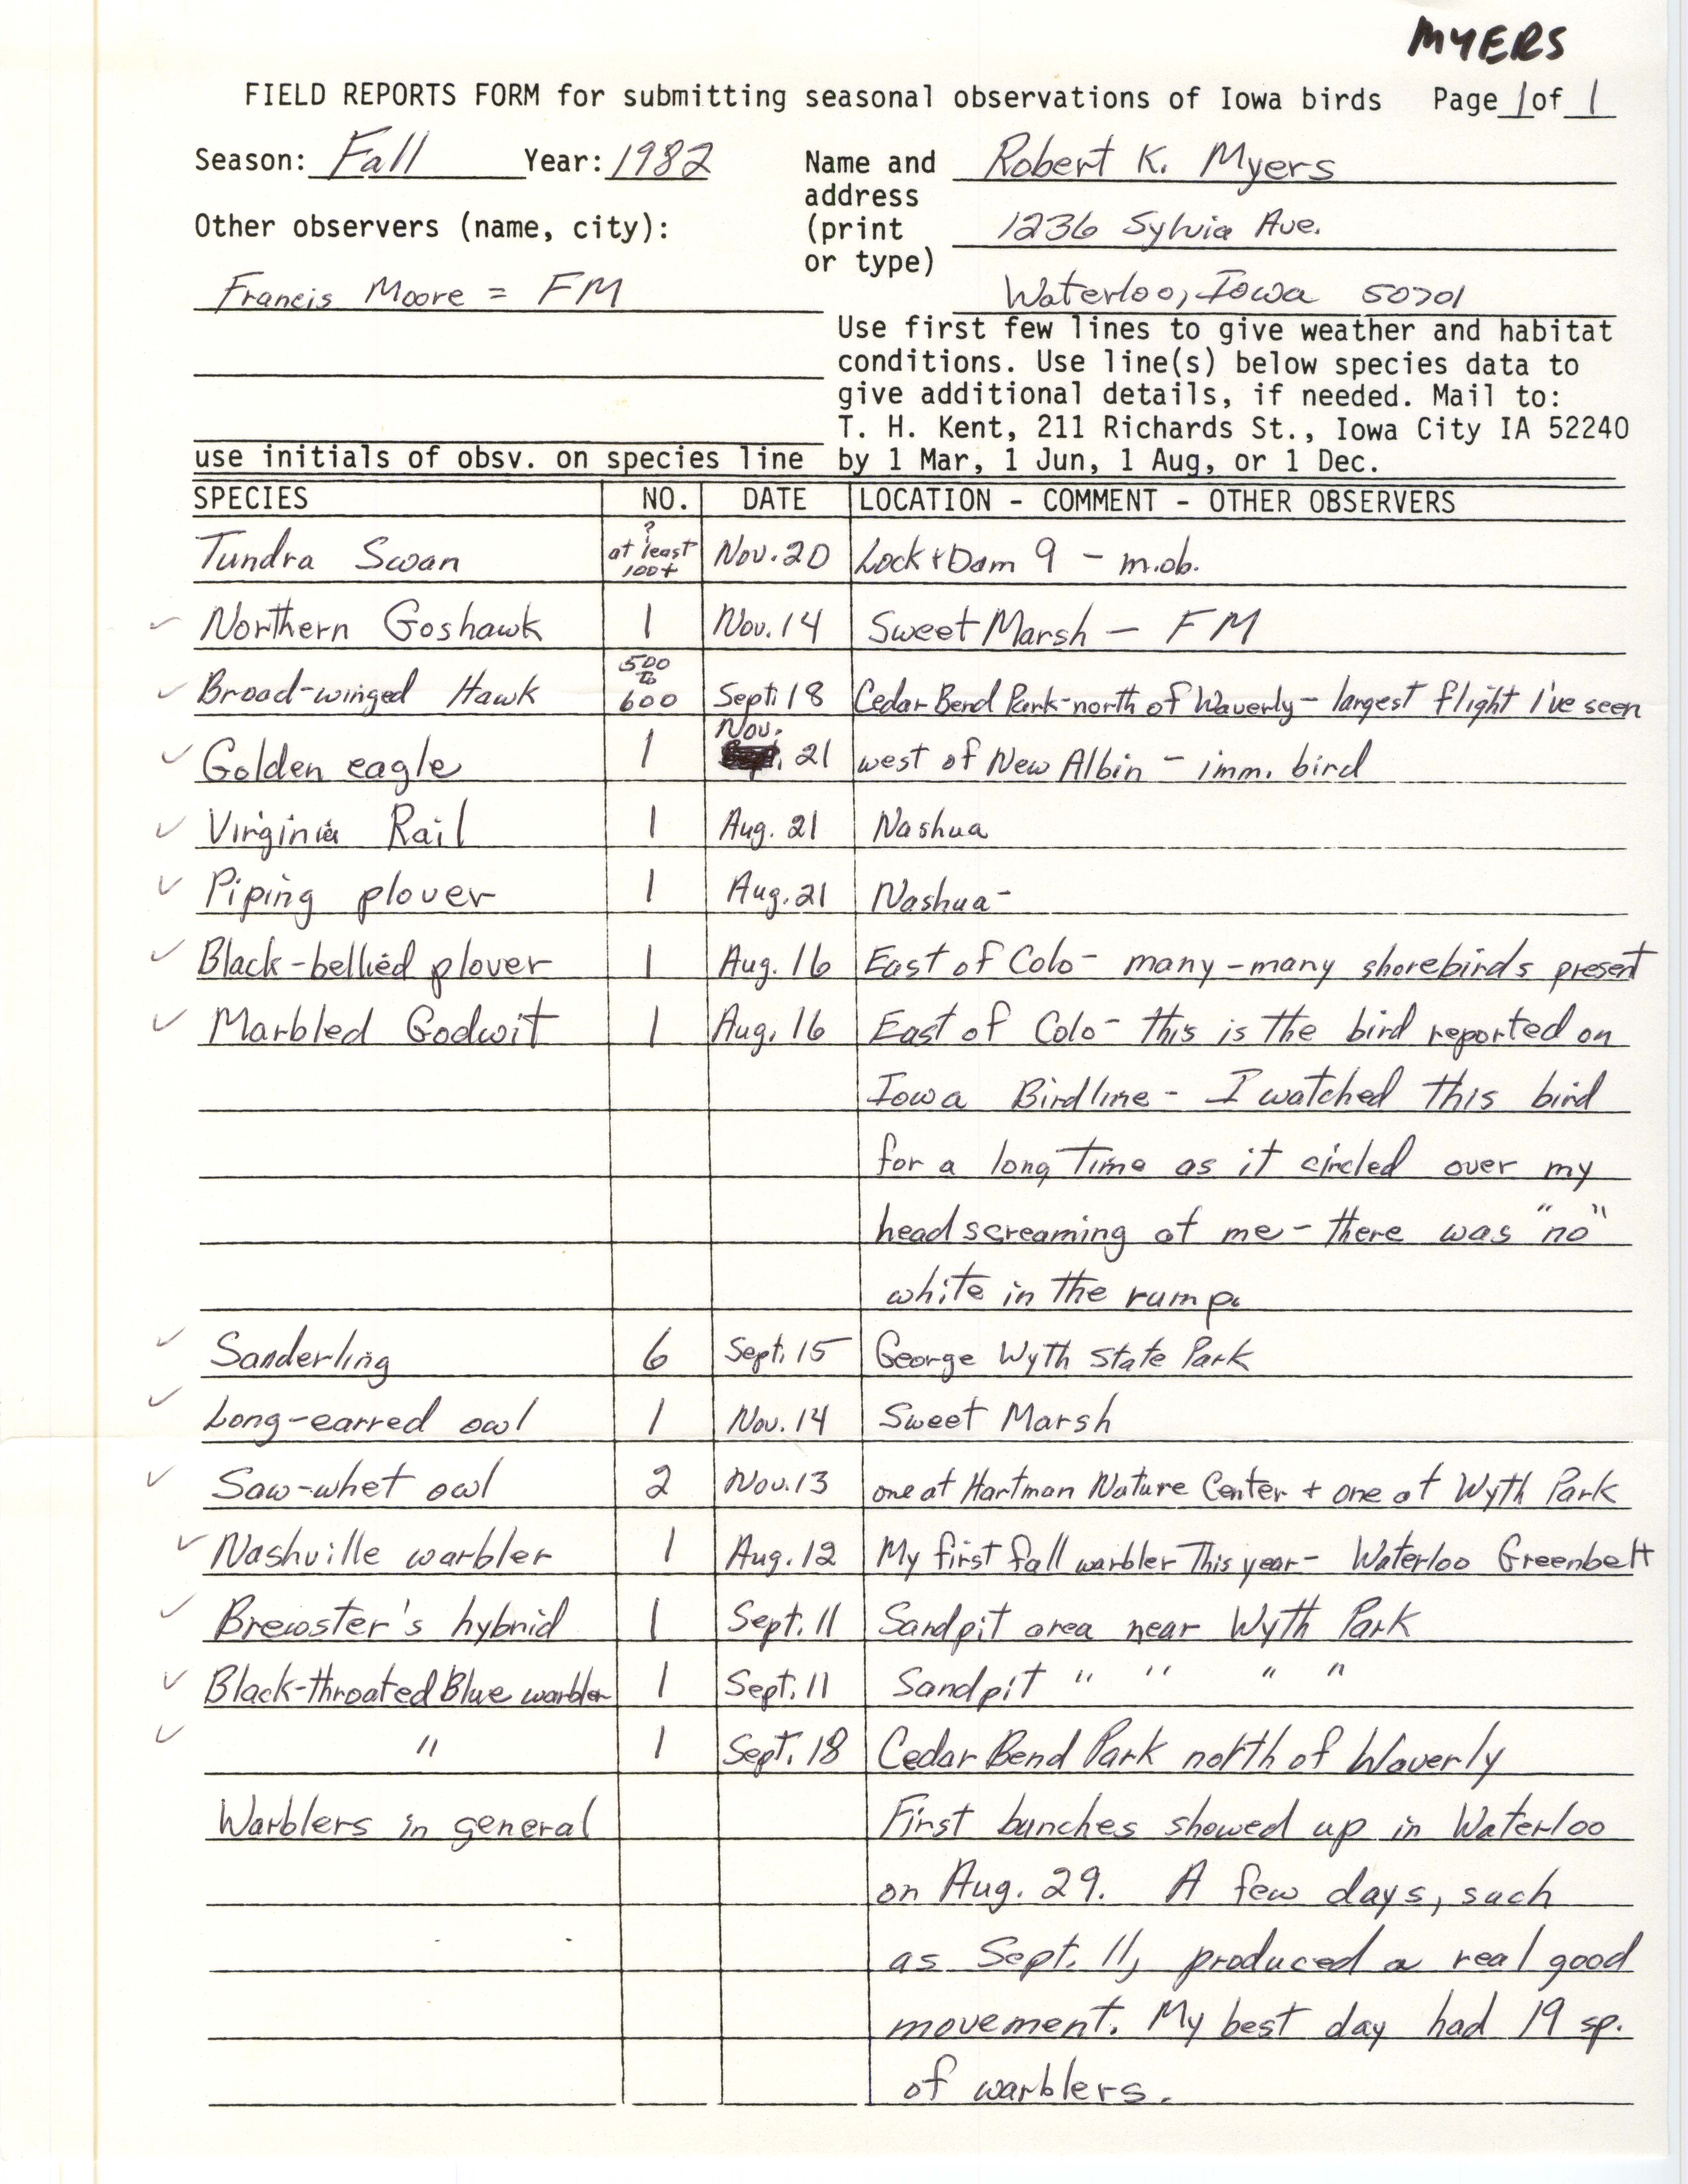 Field notes contributed by Robert K. Myers, fall 1982